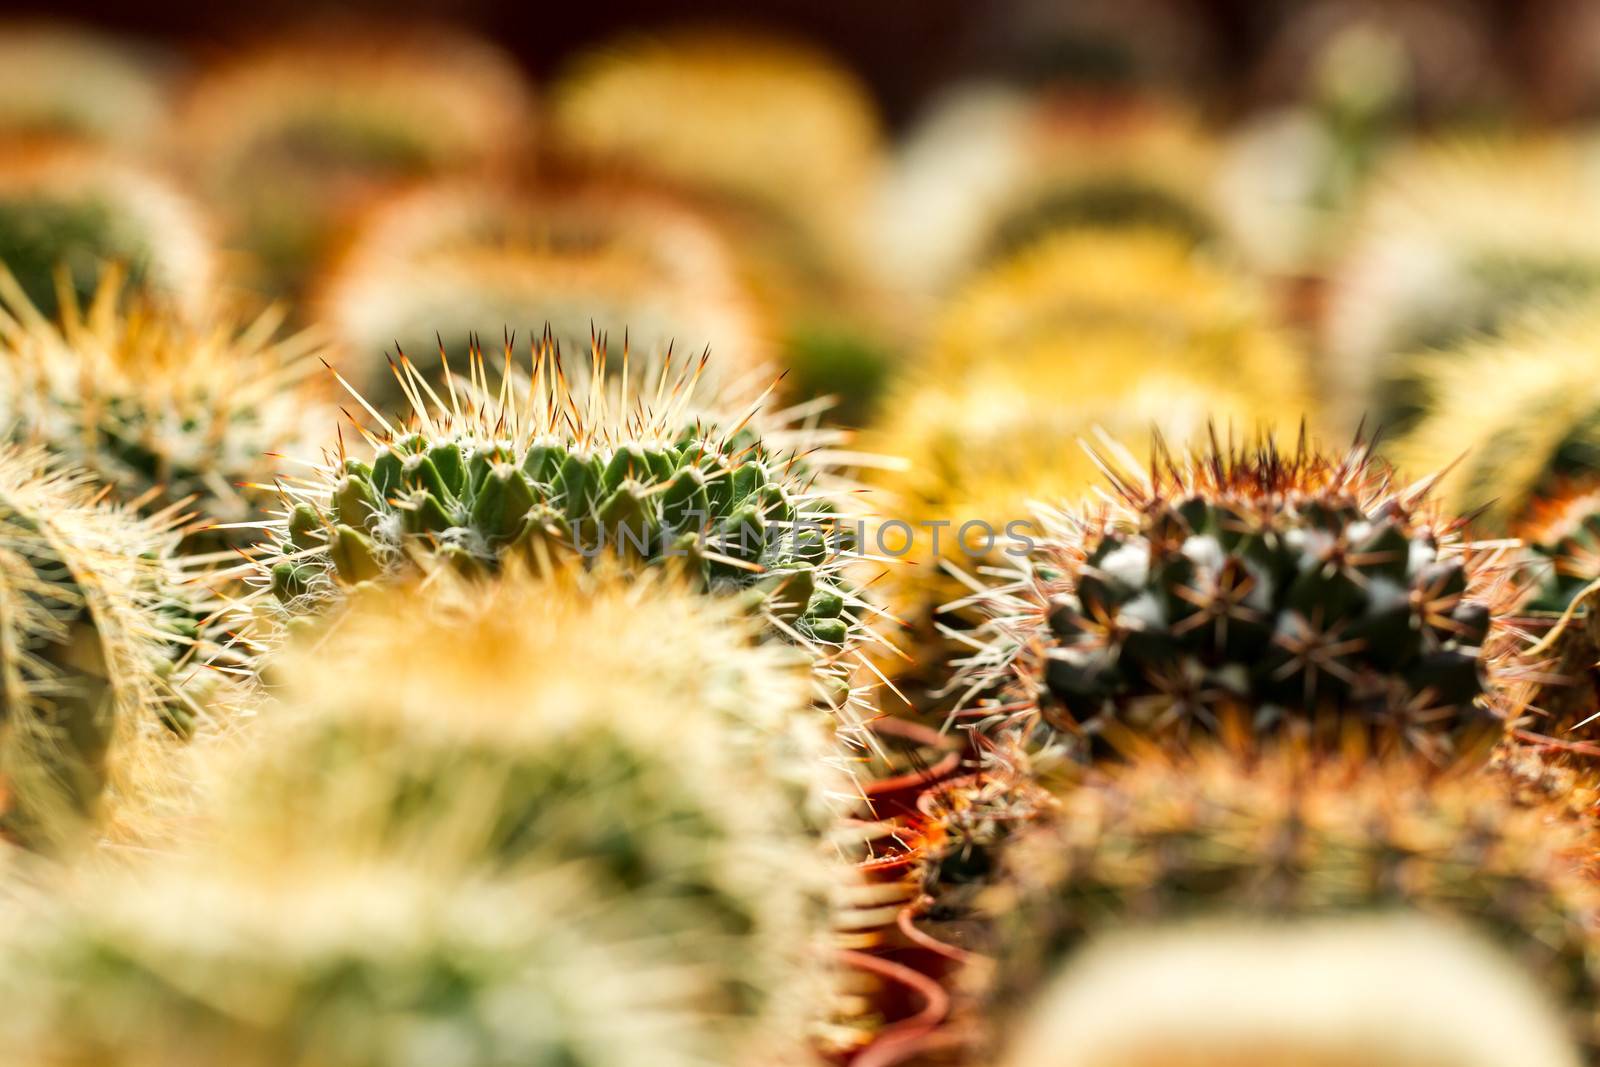 Cactus for sale by azamshah72